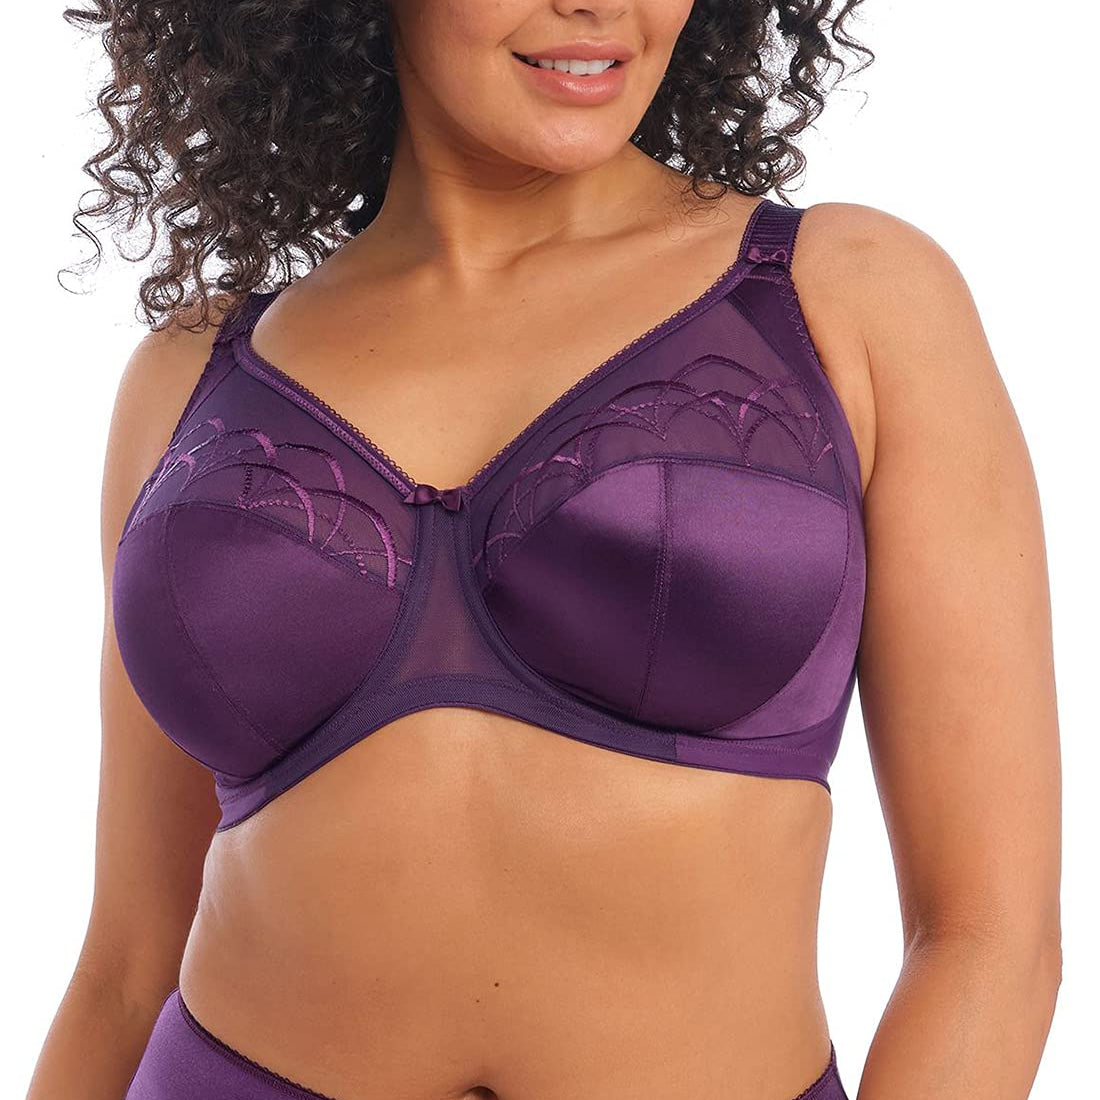 Elomi Women's Cate Embroidered Full Cup Banded Underwire Bra (4030)